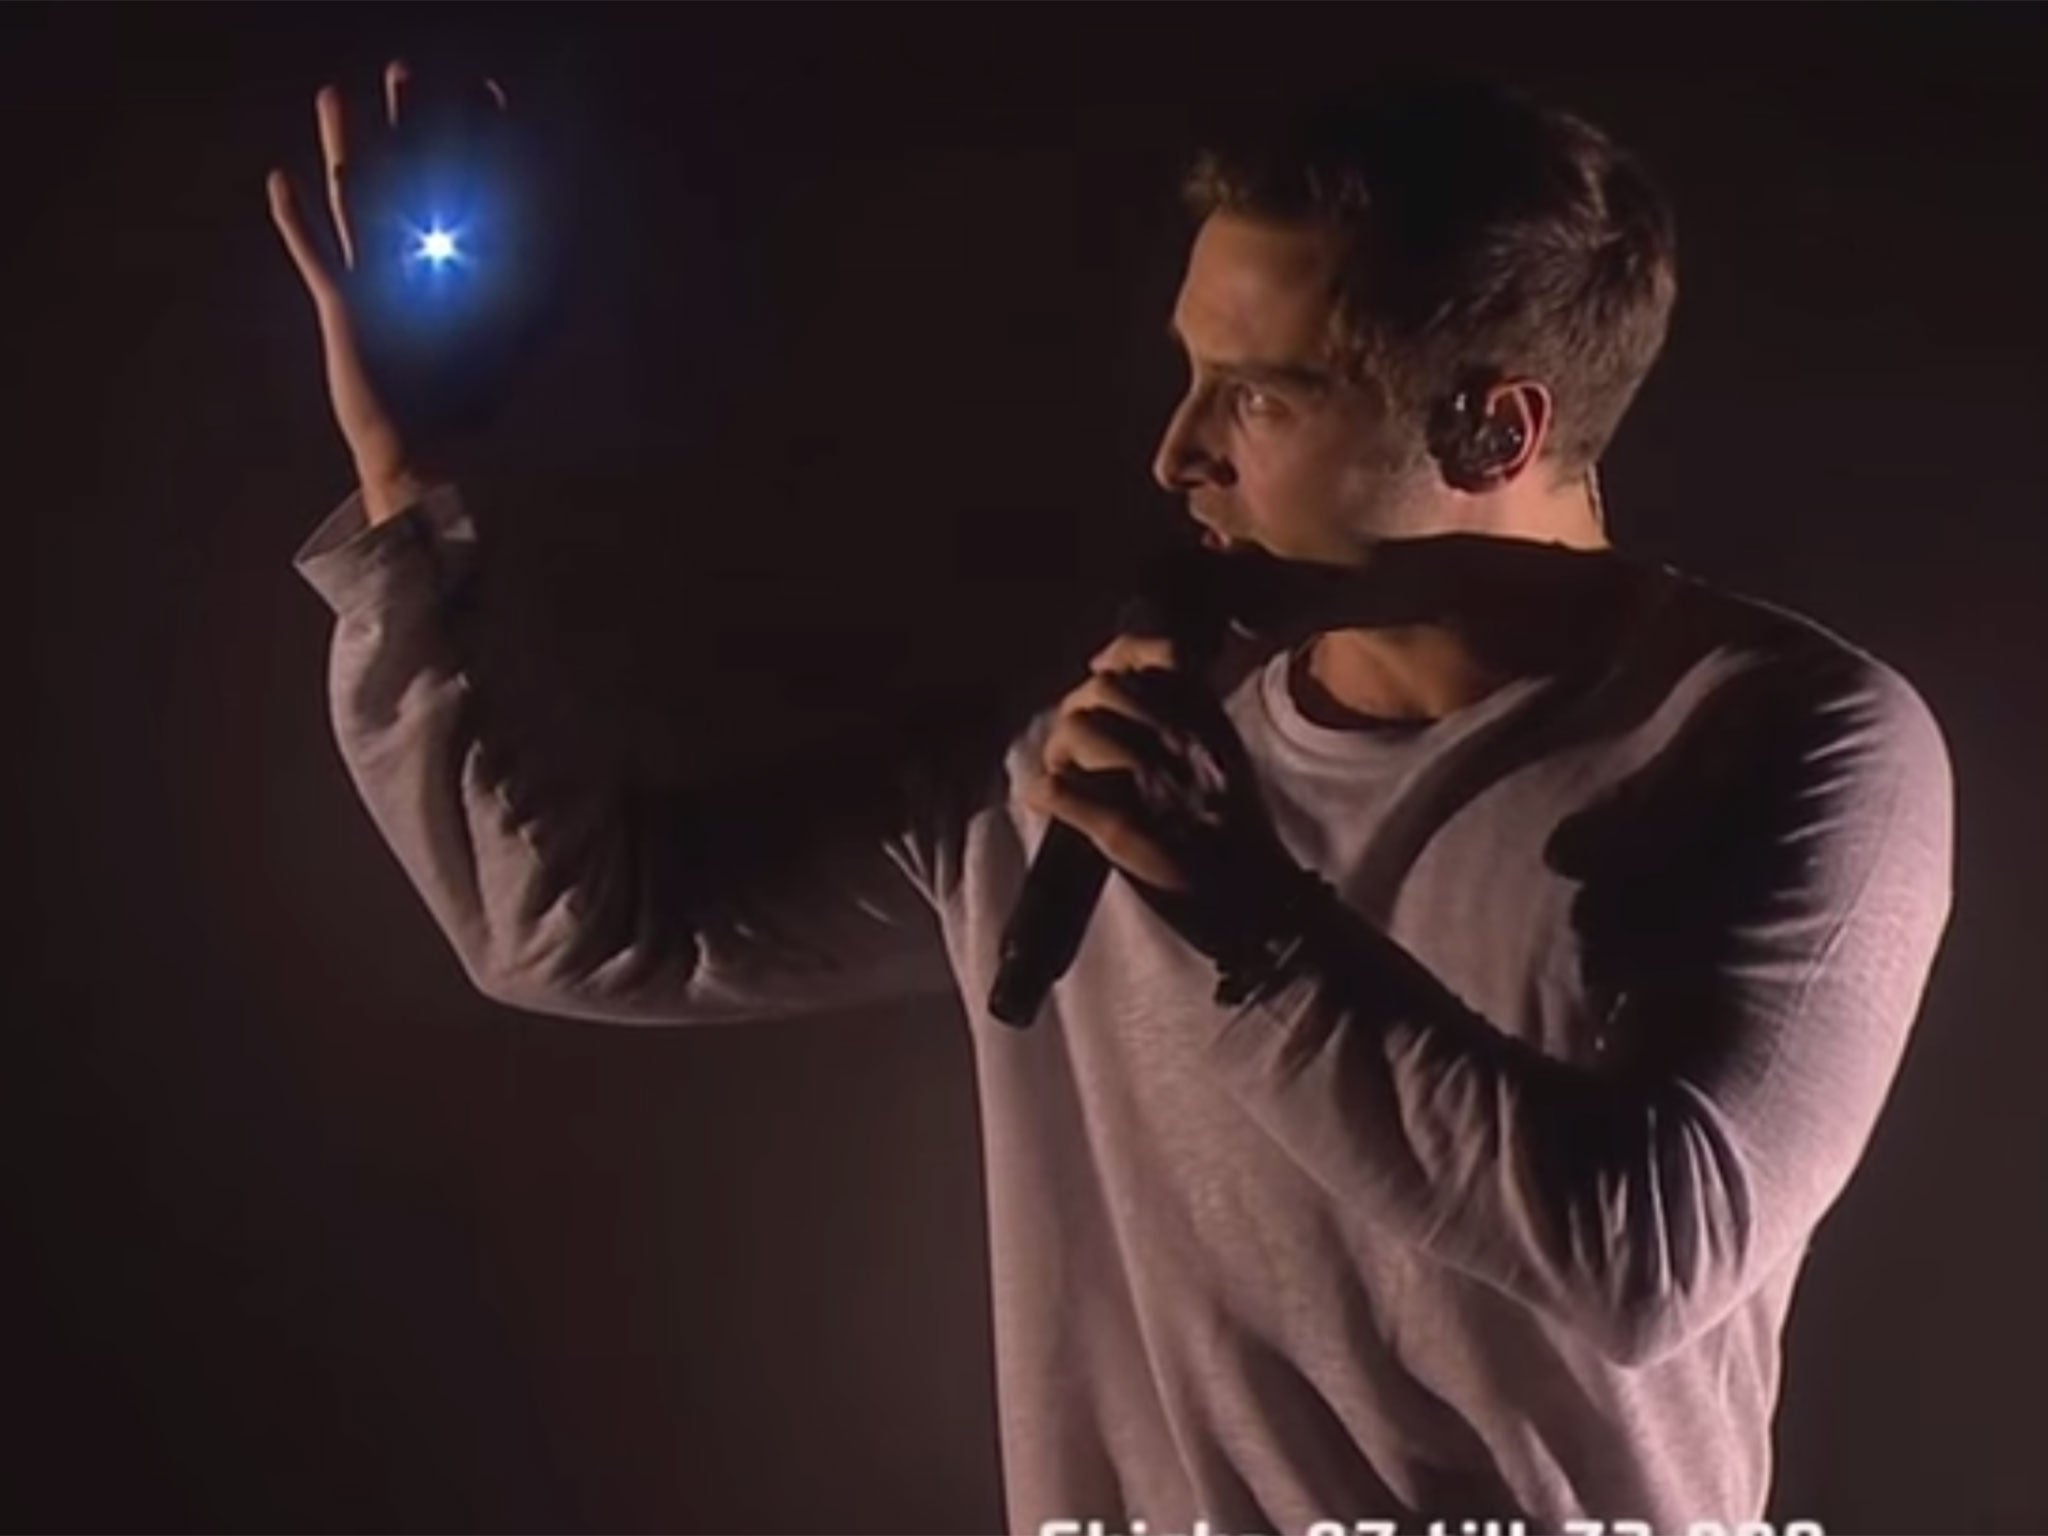 Mans Zelmerlow will perform 'Heroes' for Sweden at the Eurovision Song Contest 2015